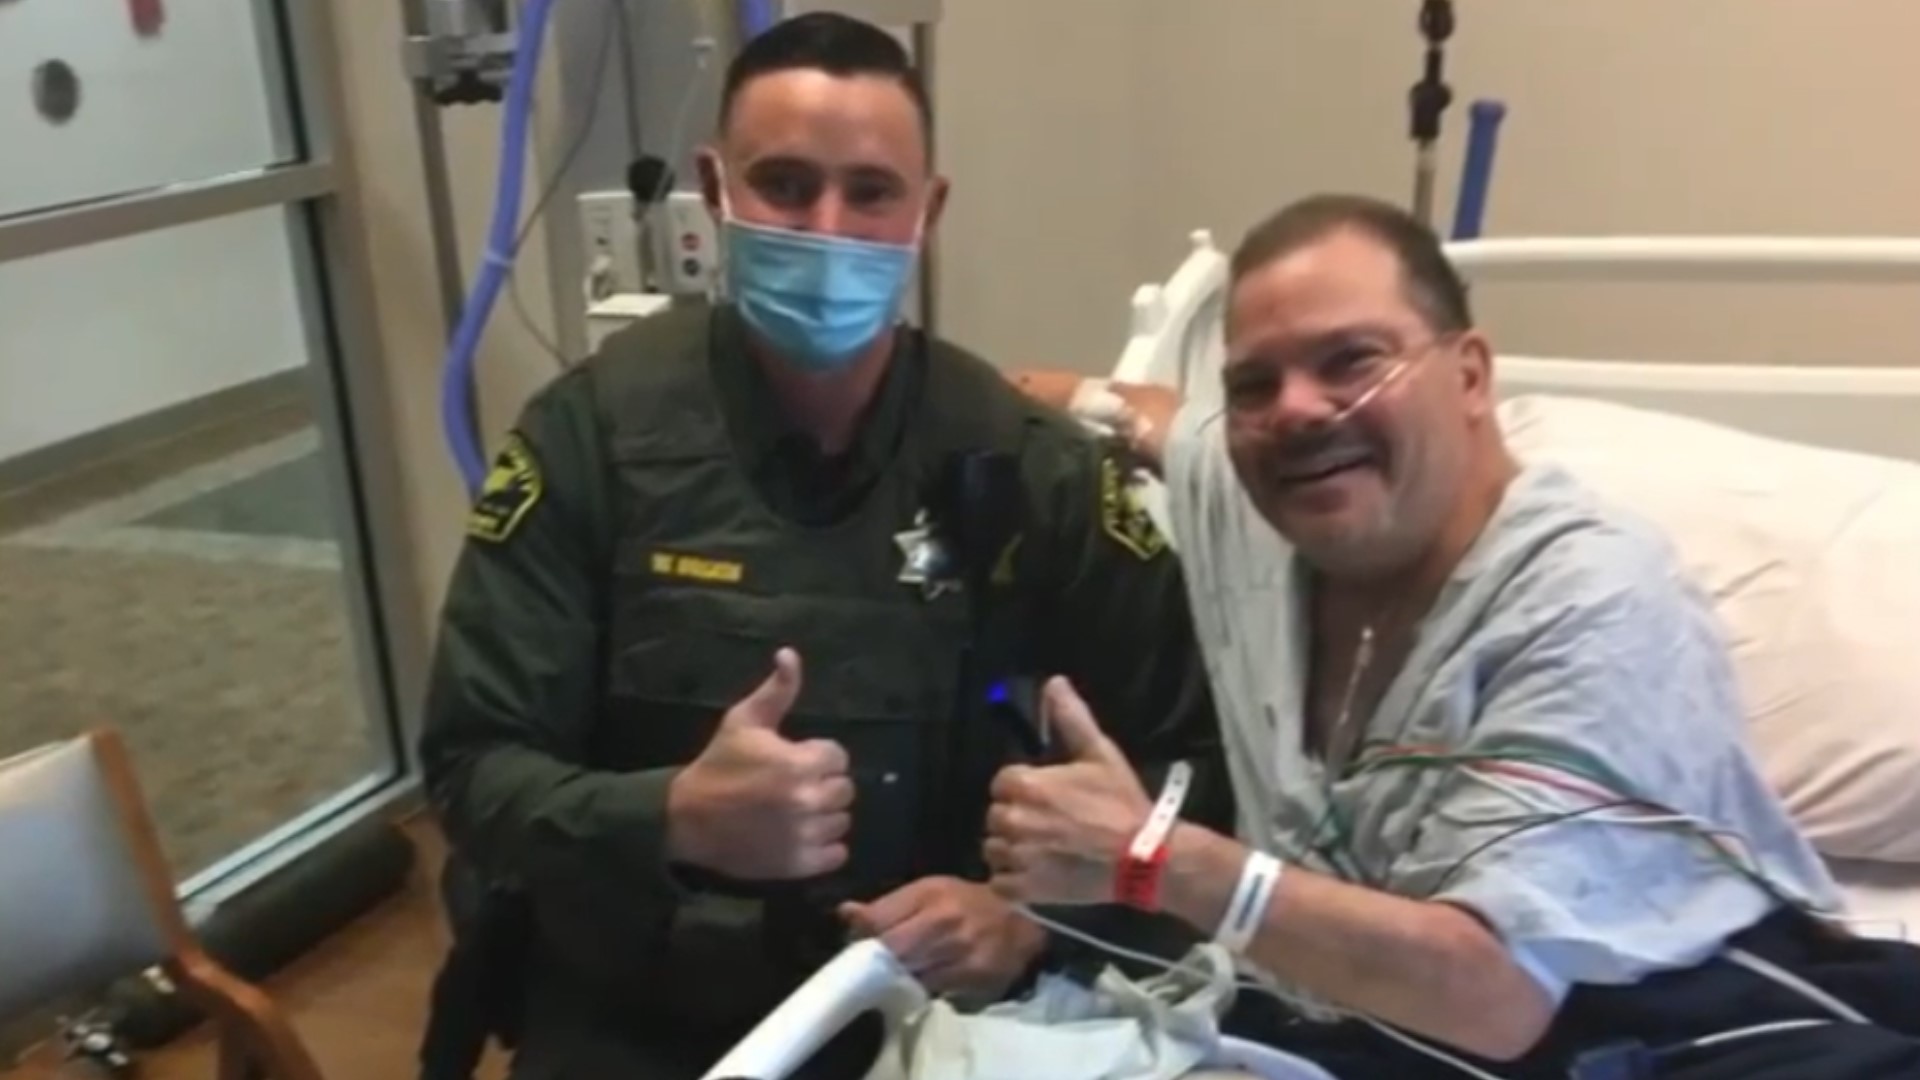 A 58-year-old COVID survivor from South Lake Tahoe was having a medical emergency and a Placer County sheriff's deputy helped save his life.